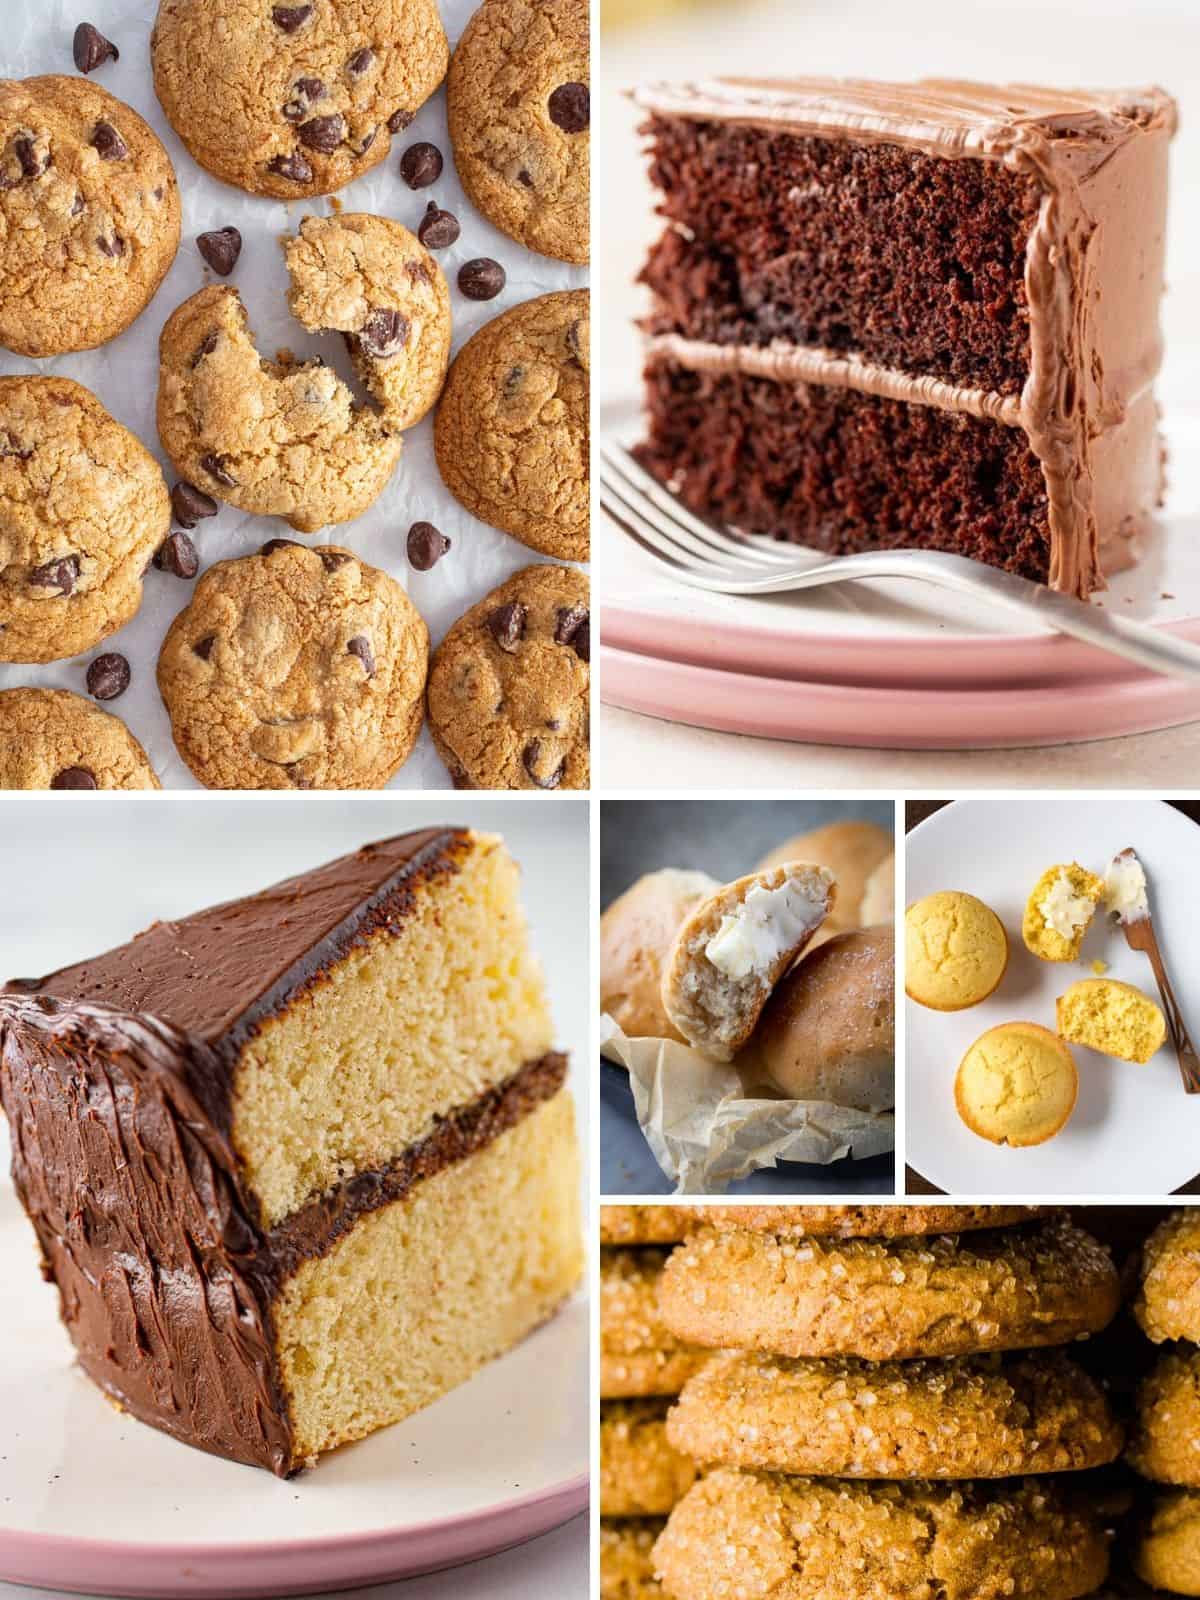 Collage of six gluten-free baked goods.  Chocolate chip cookies. Chocolate cake. Yellow cake. Soft rolls. Corn muffins. Molasses cookies.